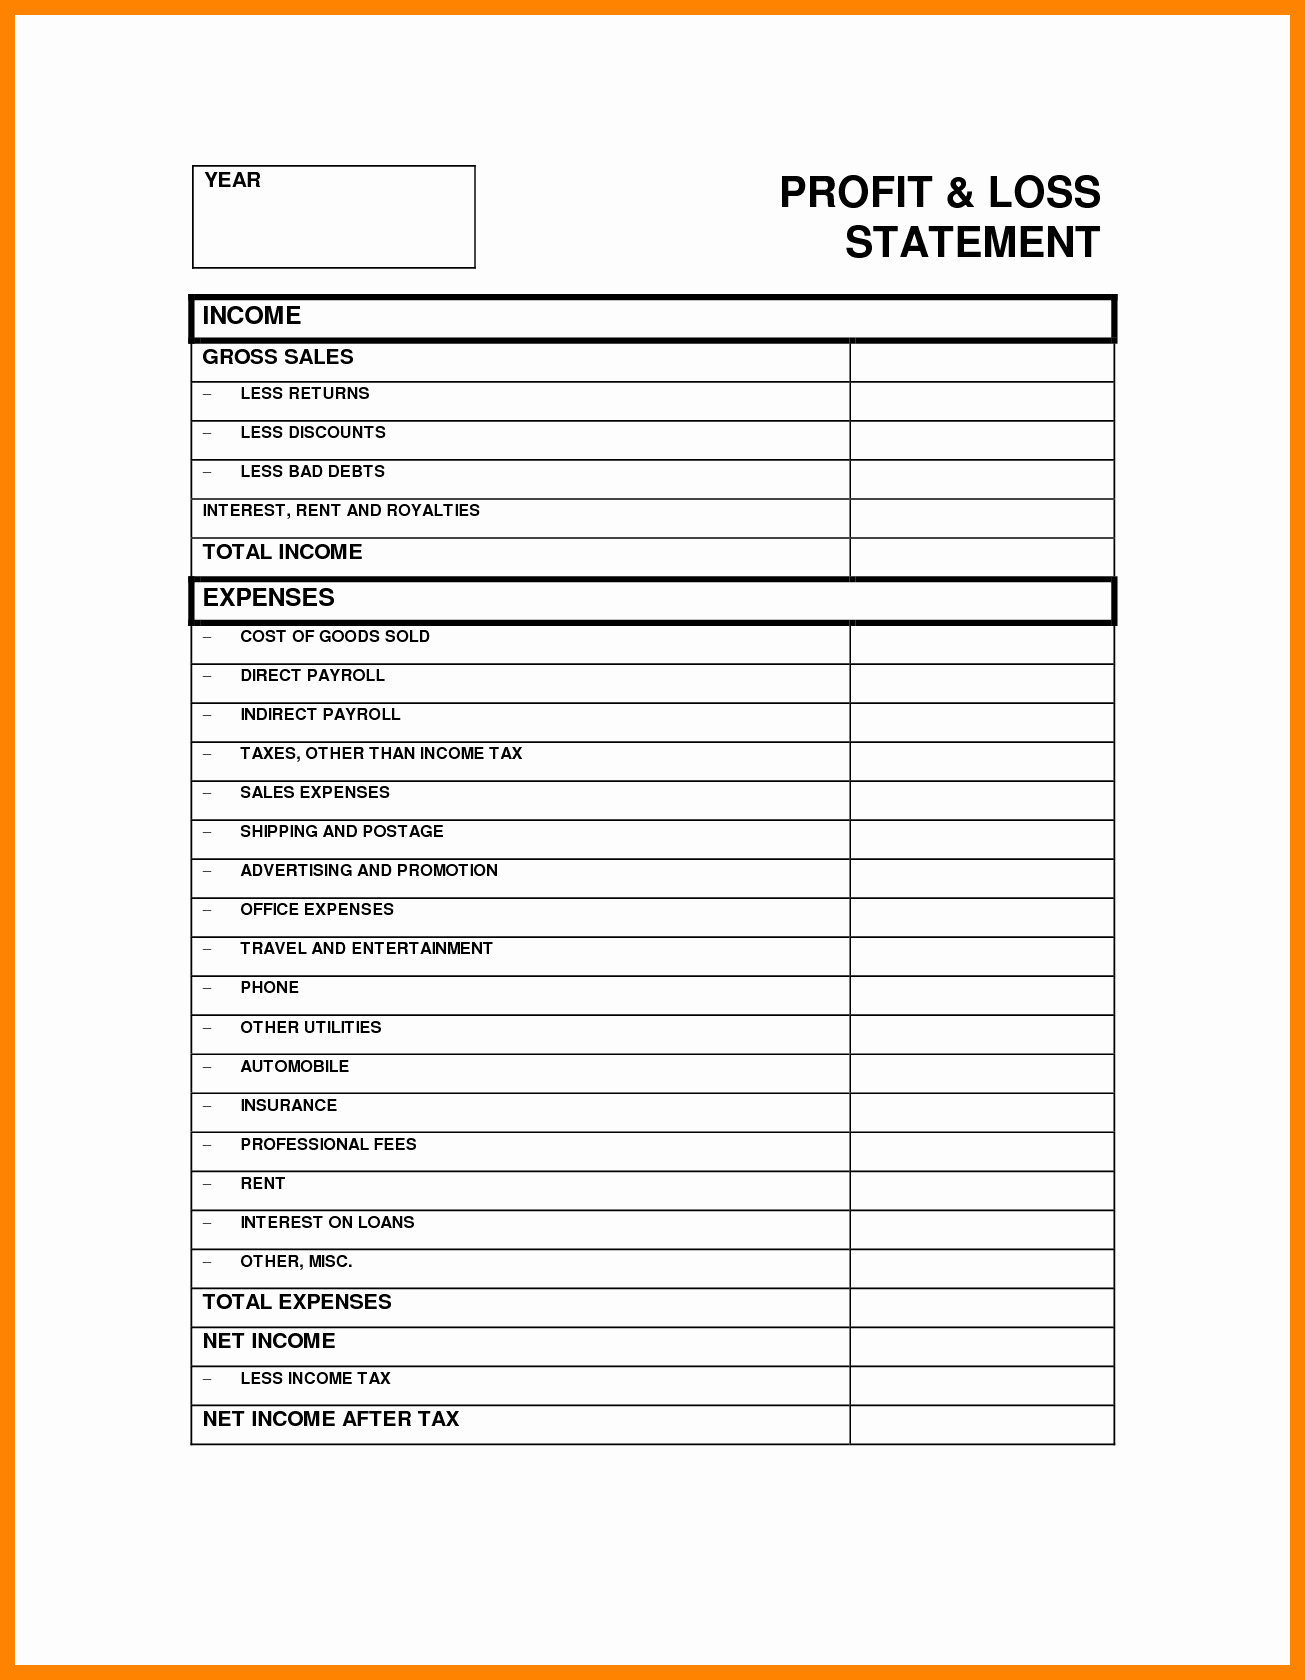 Profits and Loss Statement Template Best Of Printable Profit and Loss Statement